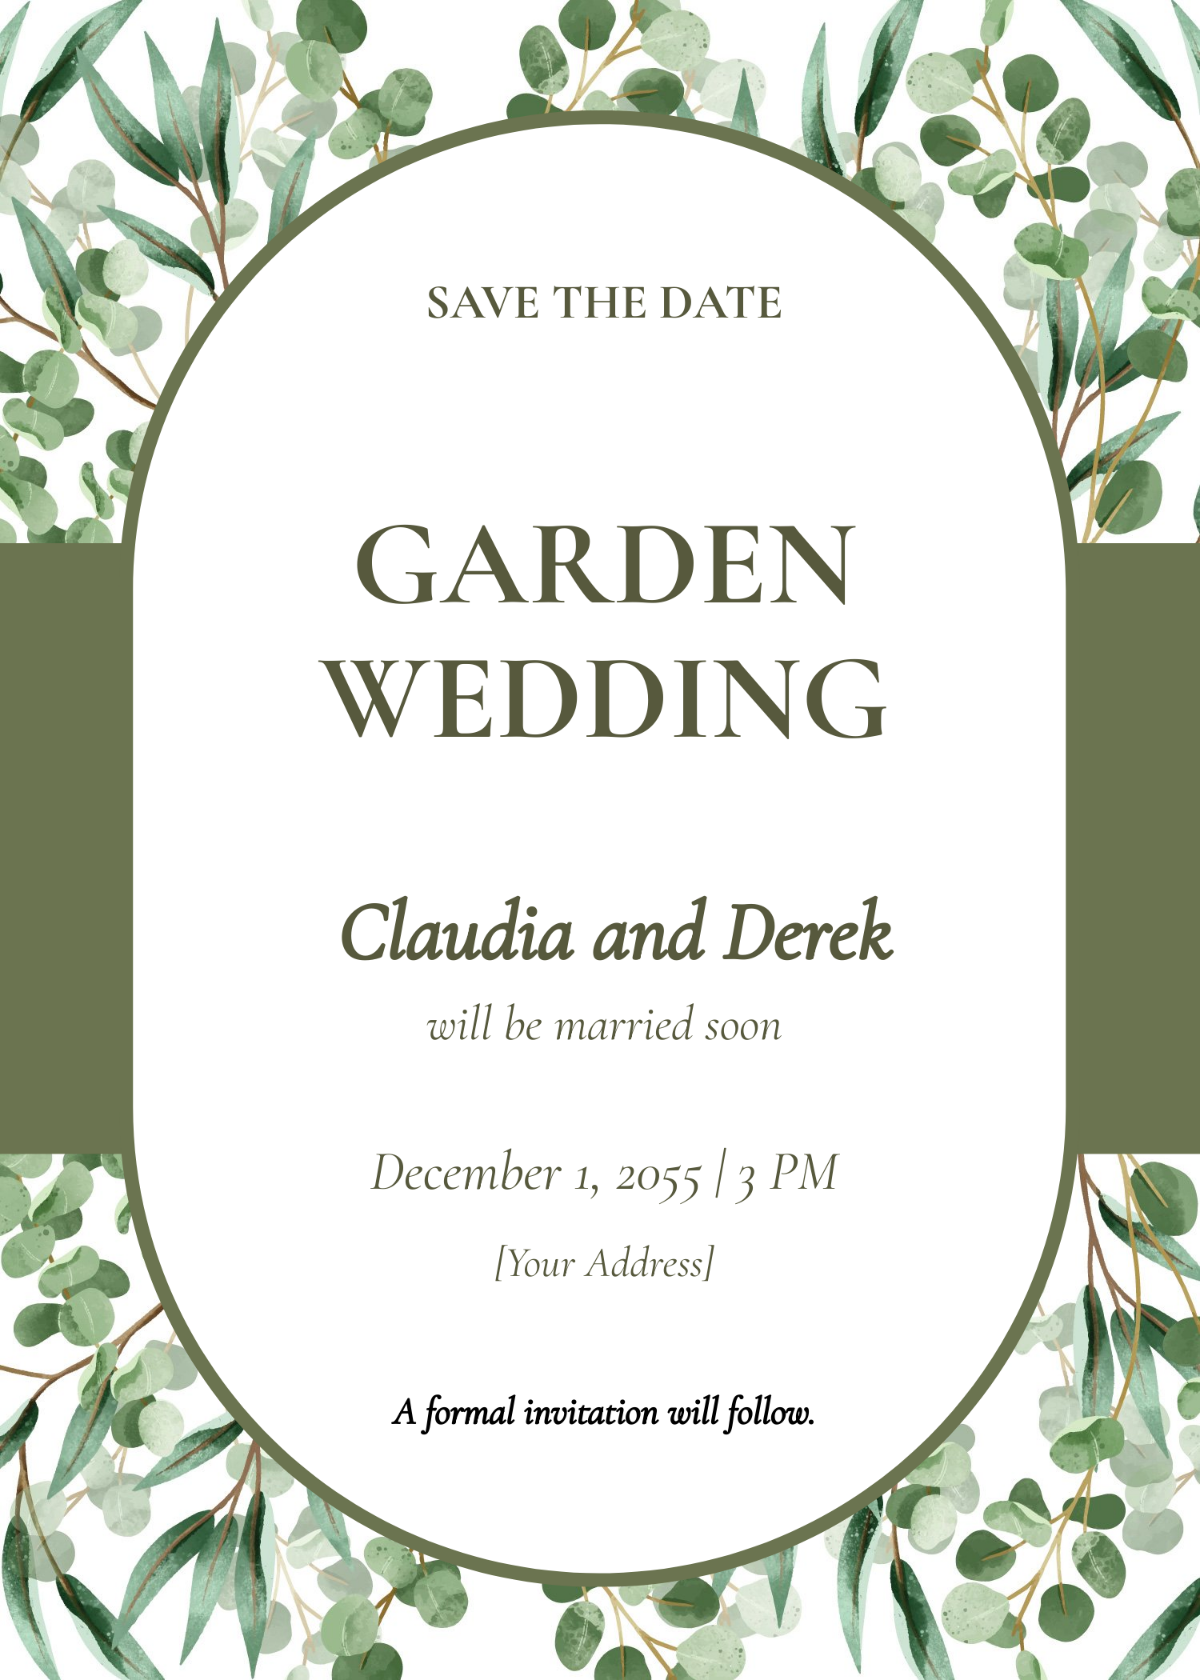 White Garden Save the Date Card